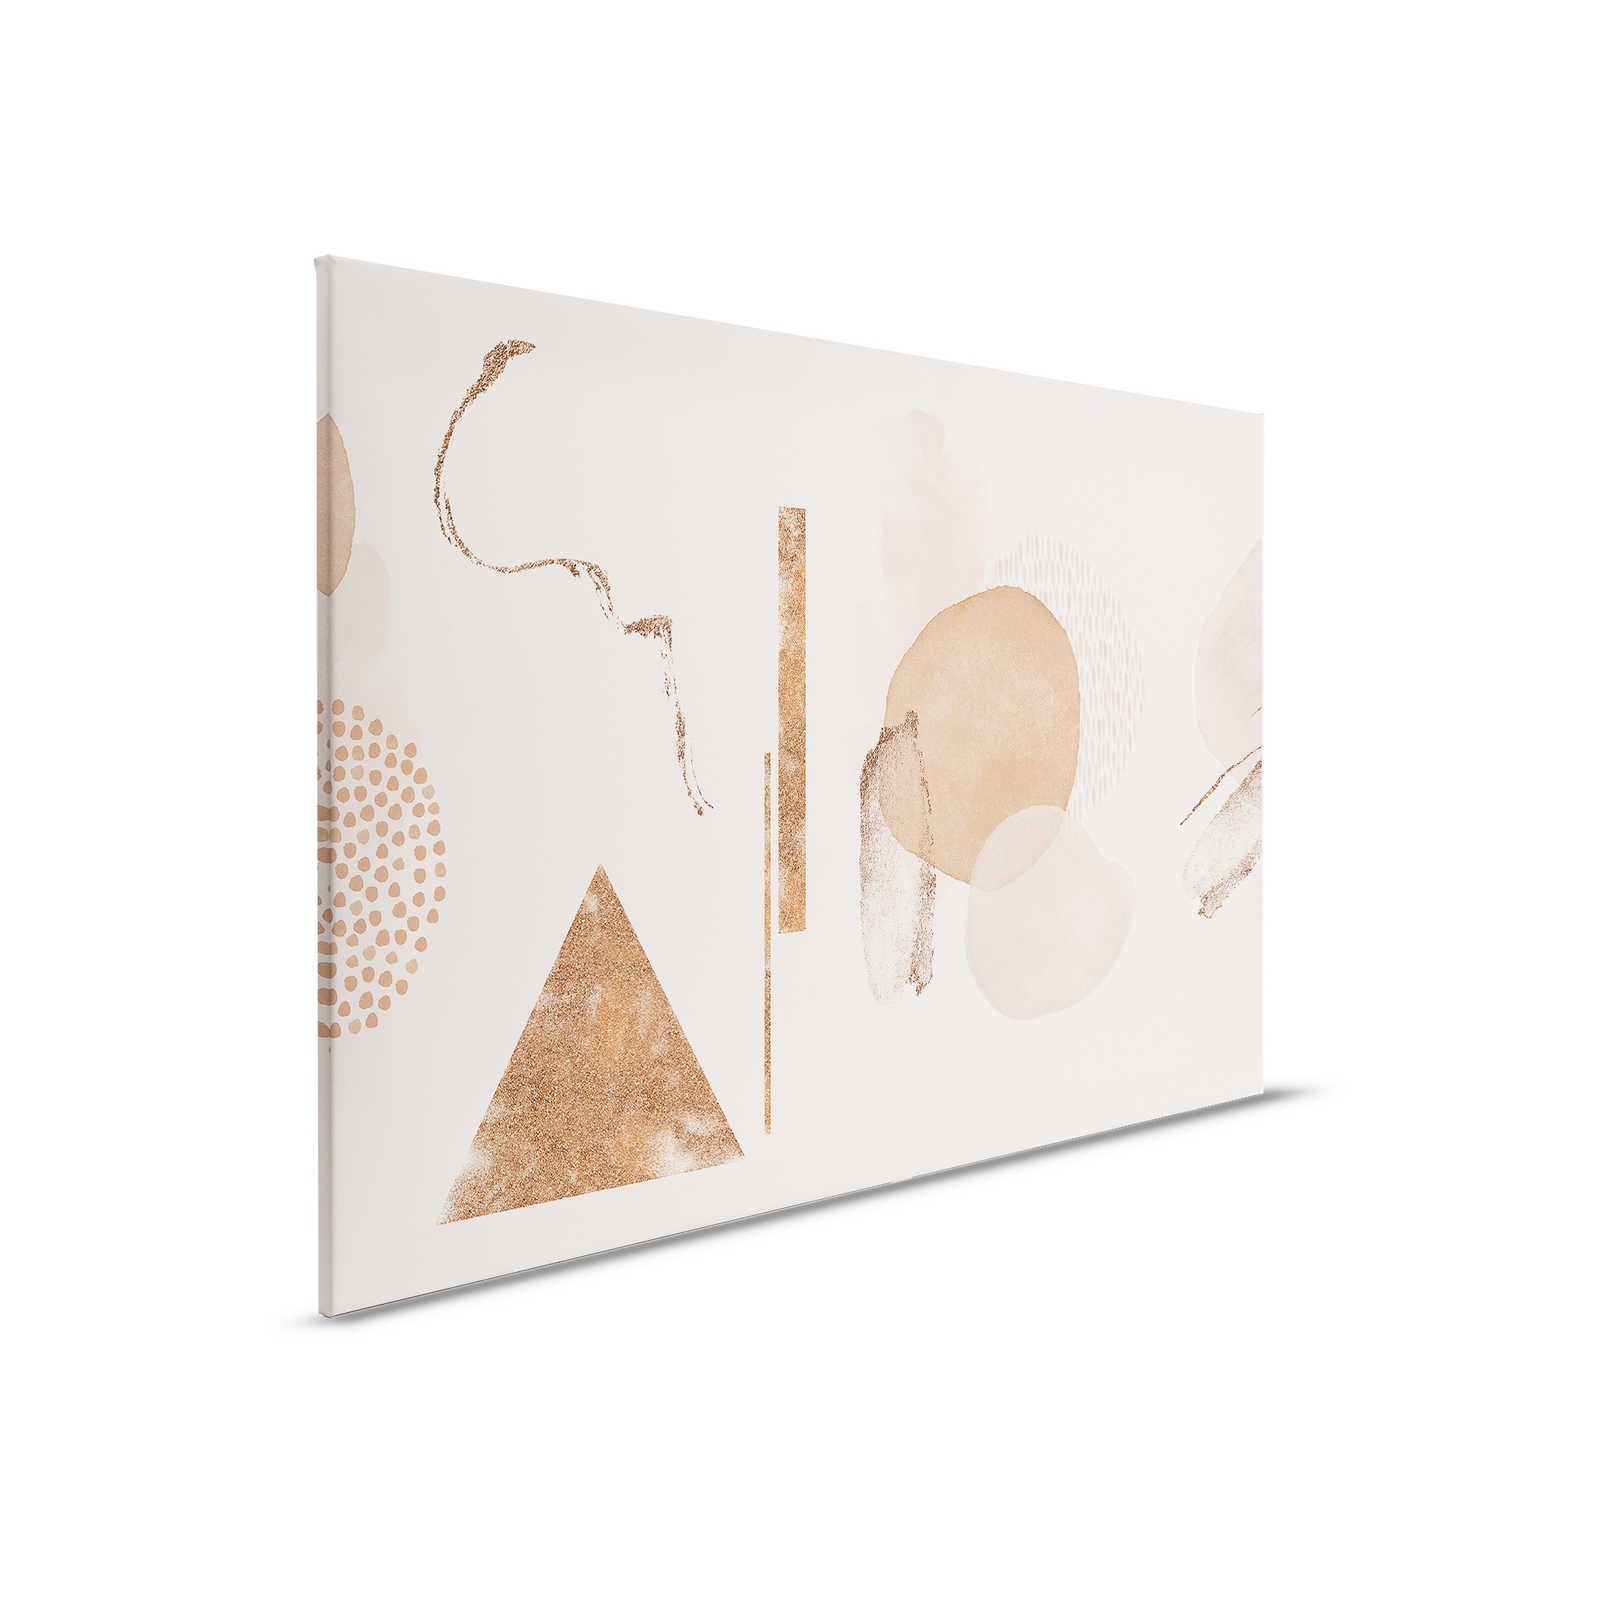         Gold Mine 3 - Beige canvas painting modern watercolour with gold accents - 0.90 m x 0.60 m
    